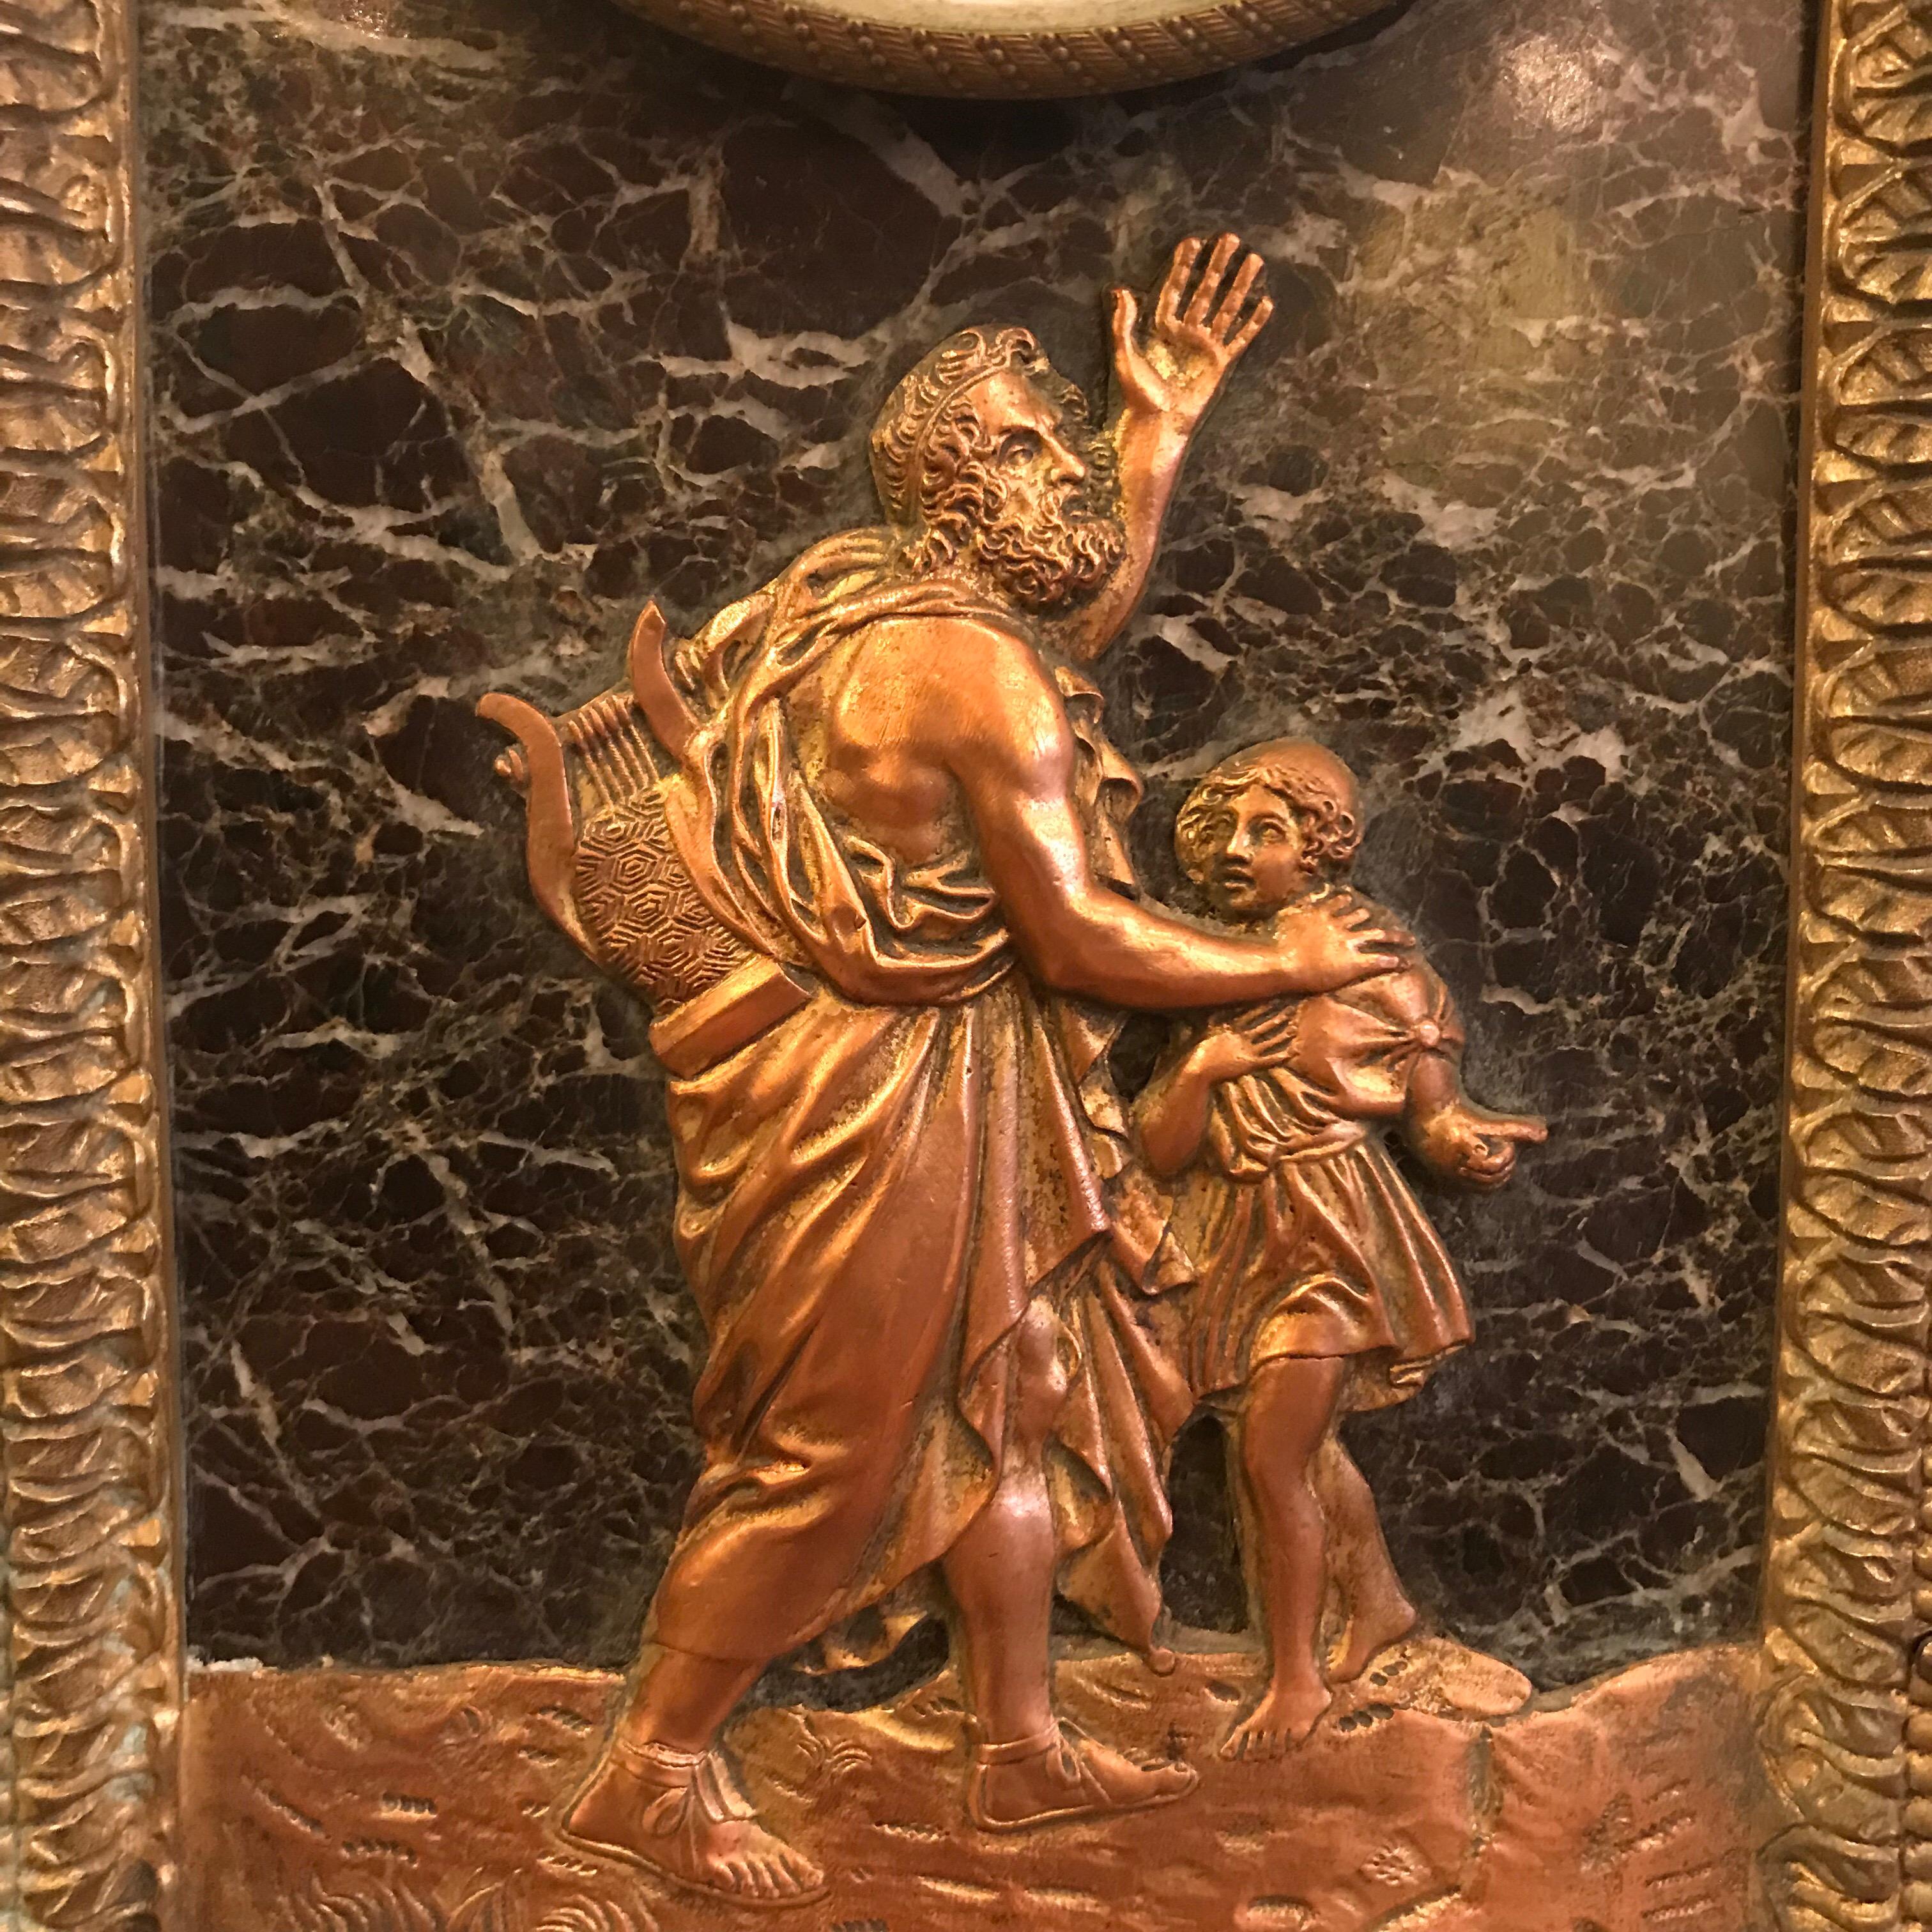 This fine French clock, in an arched verde antico marble case, is set with a bas relief panel depicting Homer. The declaiming blind poet carries his lyre, a young boy leading him. It is boldly framed in bronze and with a crisp broad acanthus band at